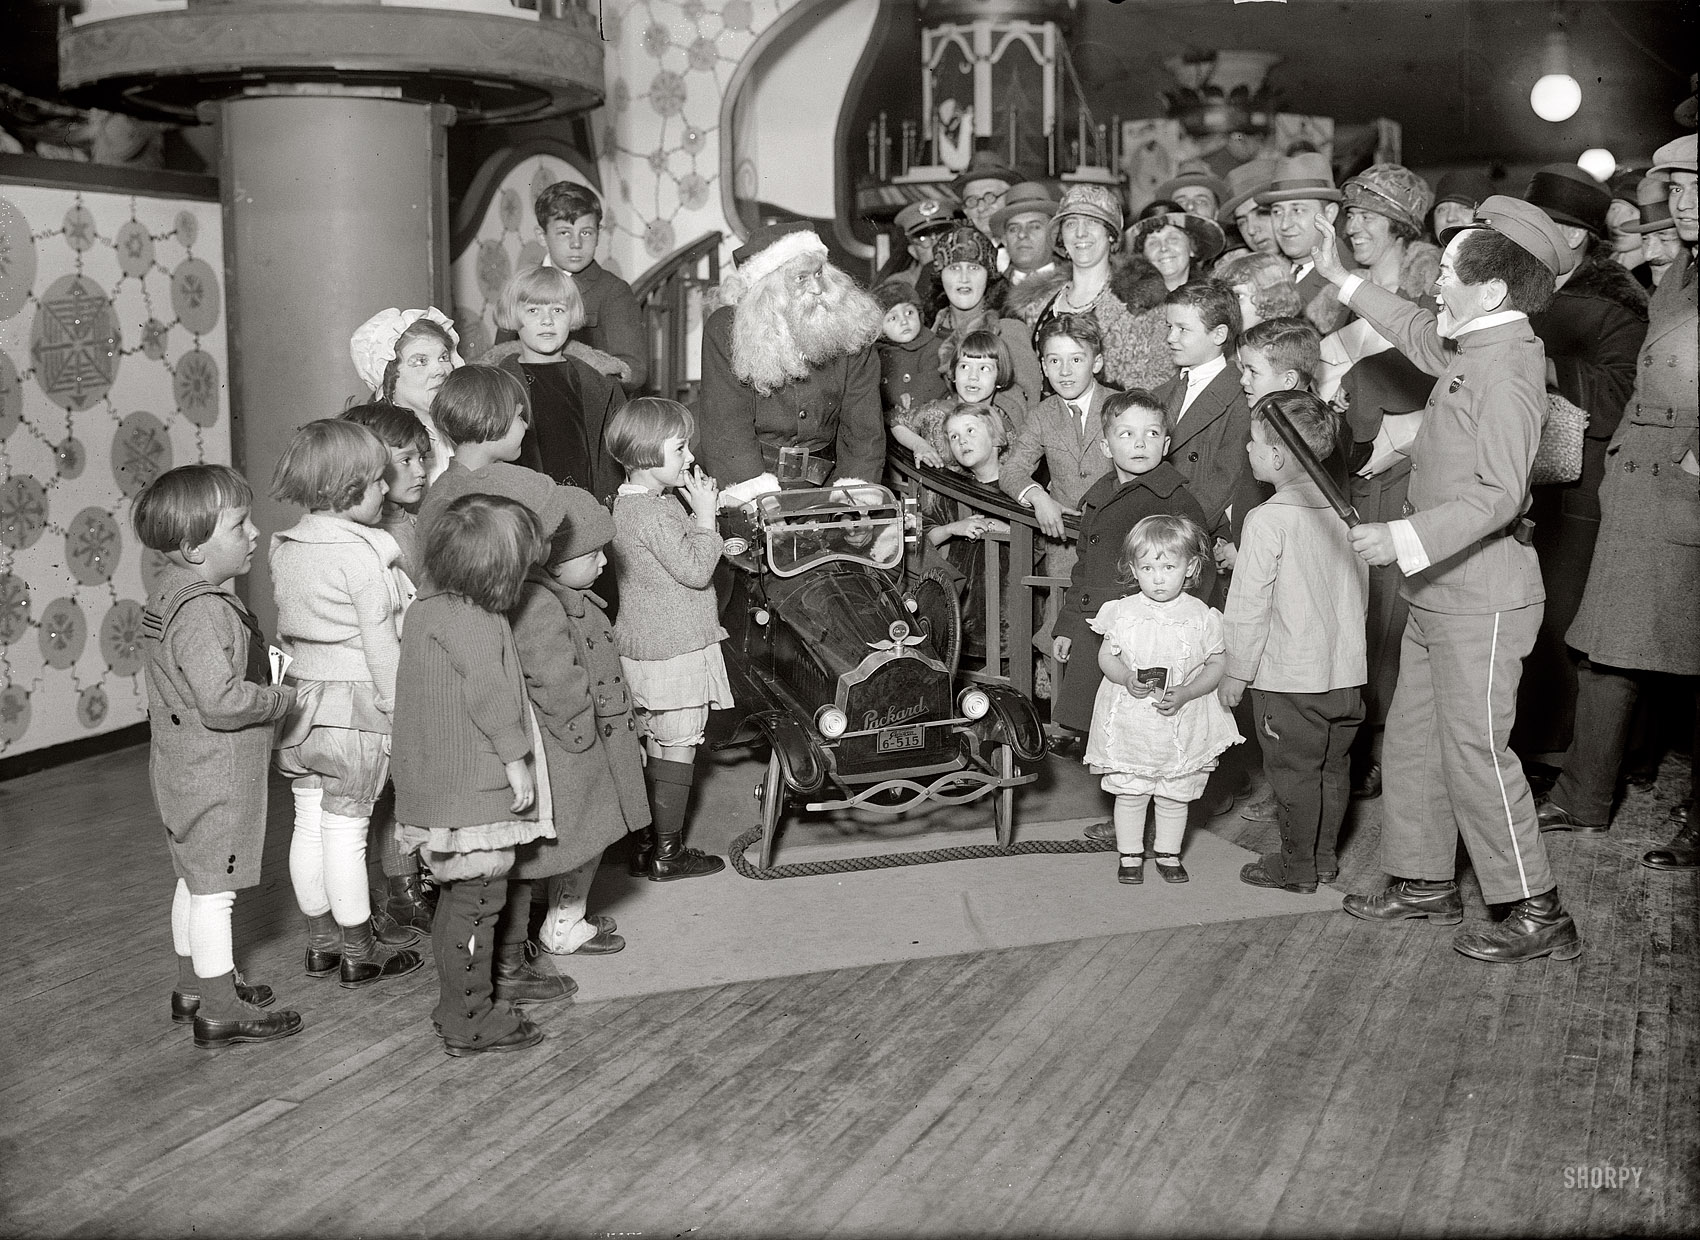 December 1924. "Santa's toys." Toy World at Wanamaker's in New York. Be nice, boys and girls, and you might get a Packard! Be naughty and you might get arrested! 5x7 glass negative, George Grantham Bain Collection. View full size.